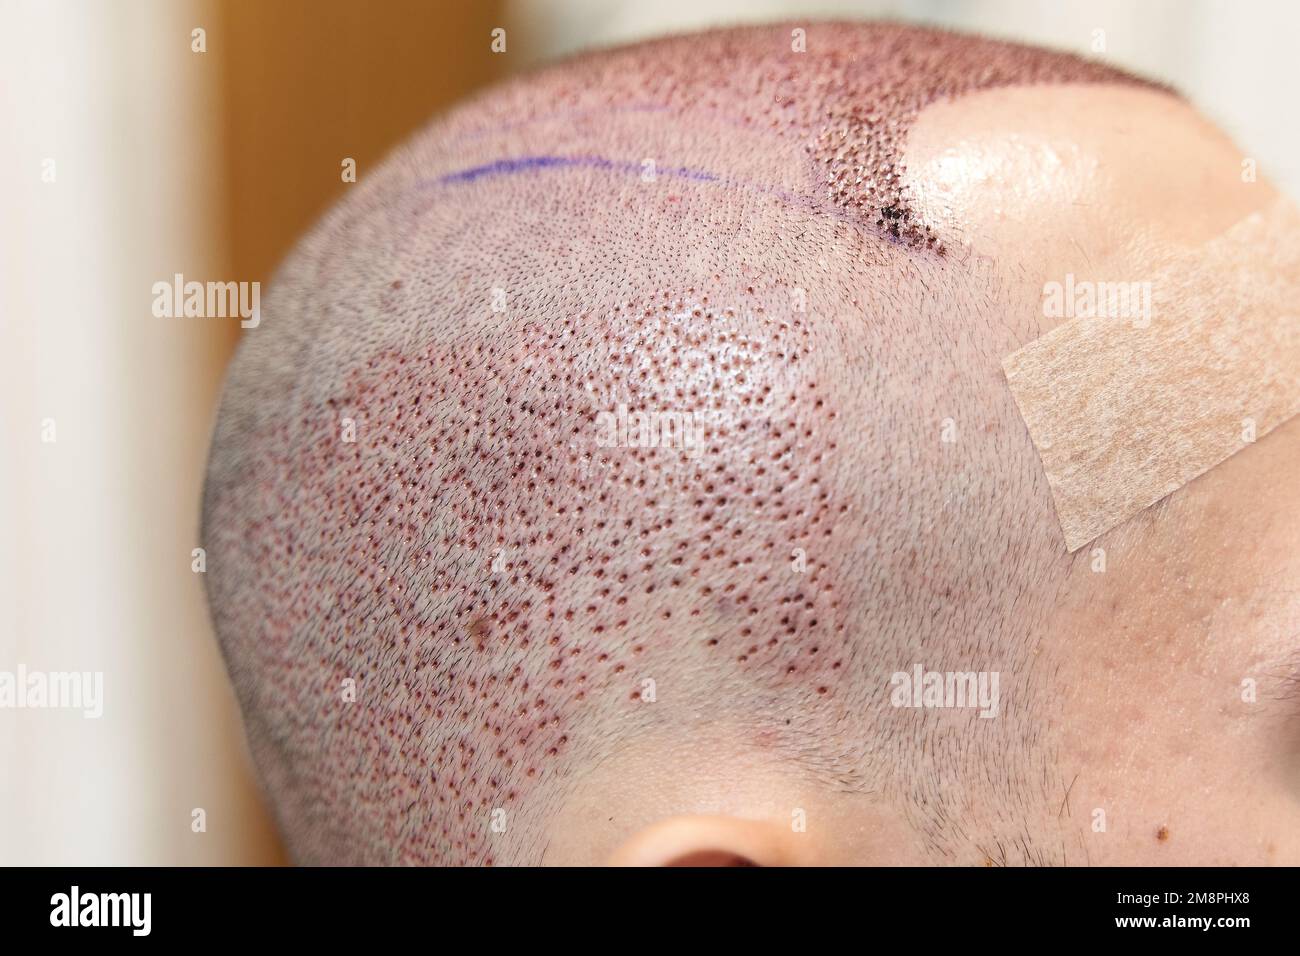 Baldness cure. Treatment for hair loss. Side view of male scalp after hair transplant surgery Stock Photo